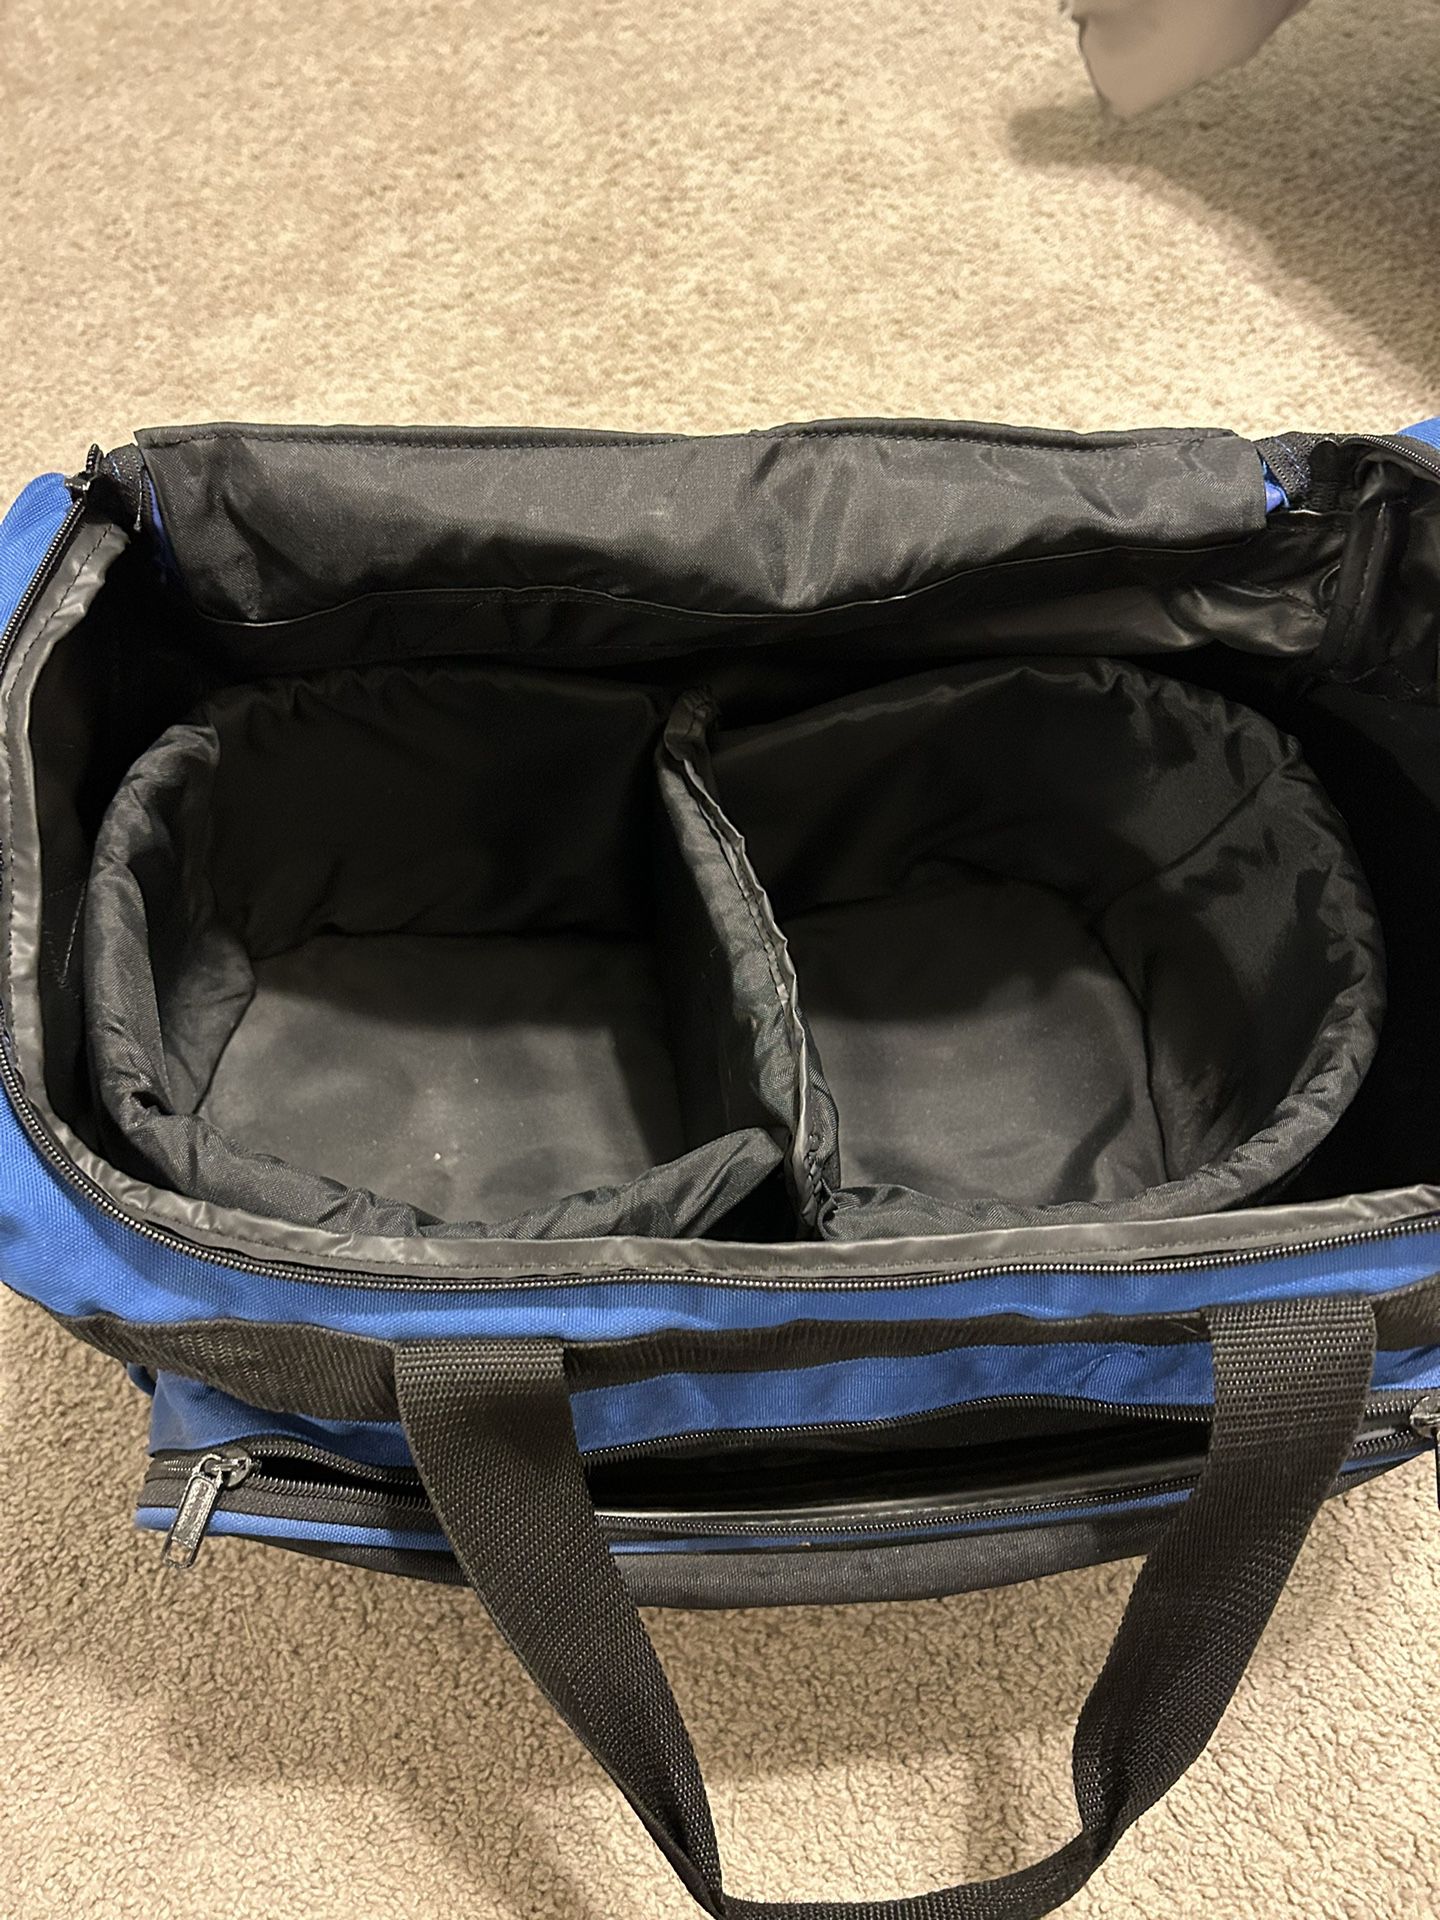 Two Ball Bowling Bag (Roller) for Sale in San Antonio, TX - OfferUp